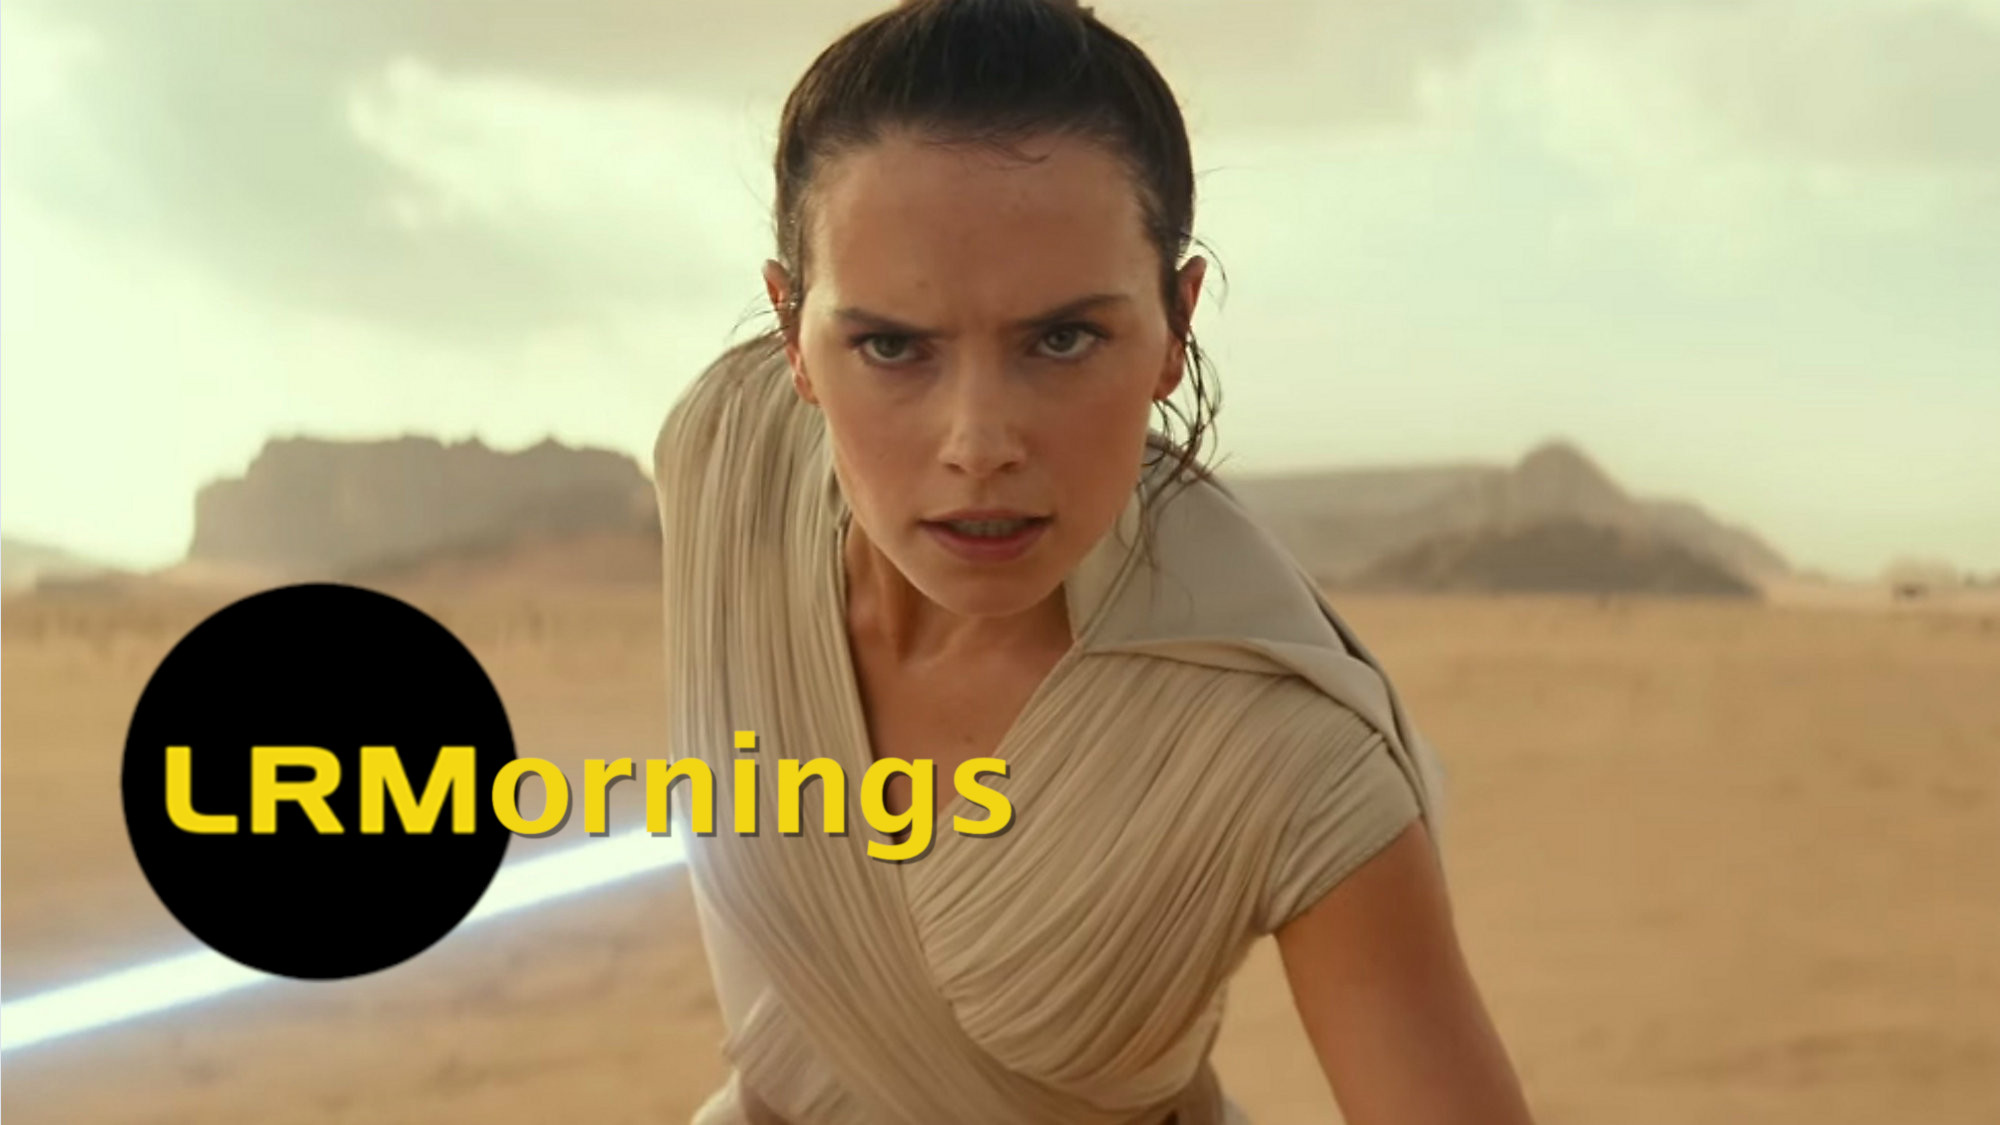 Star Wars: A Breakdown Of The New Photos And Info From The Rise Of Skywalker | LRMornings